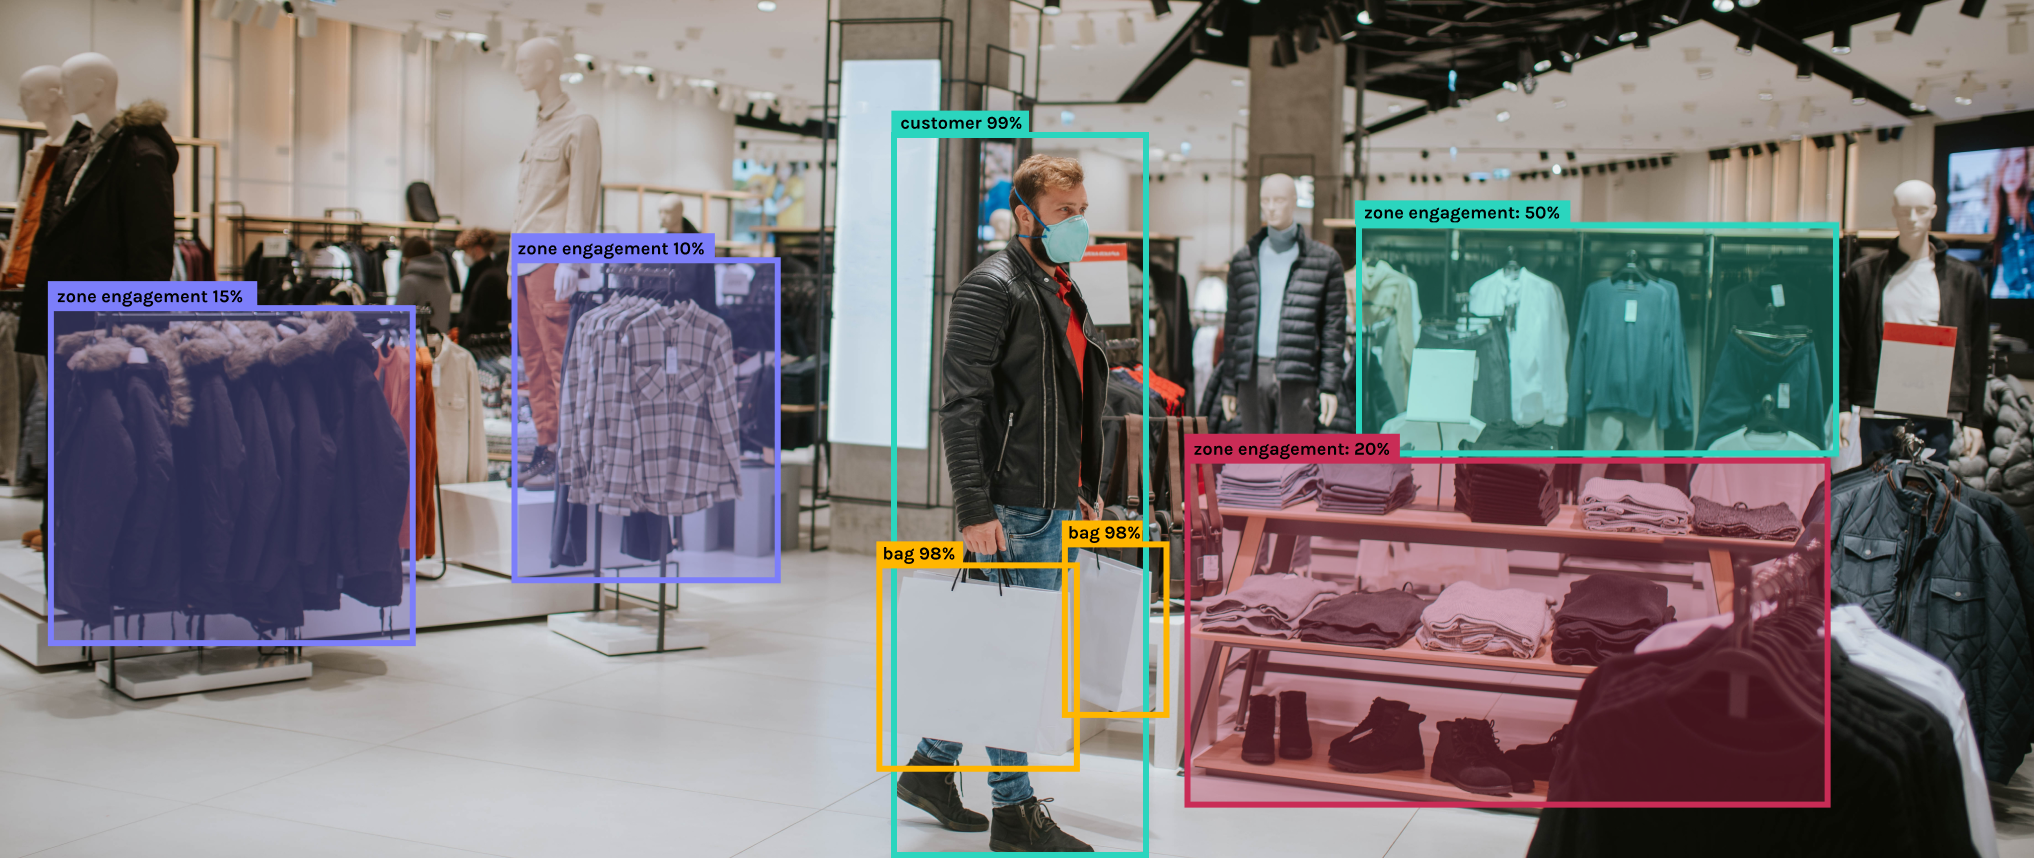 Zoning and object detection in a retails store.